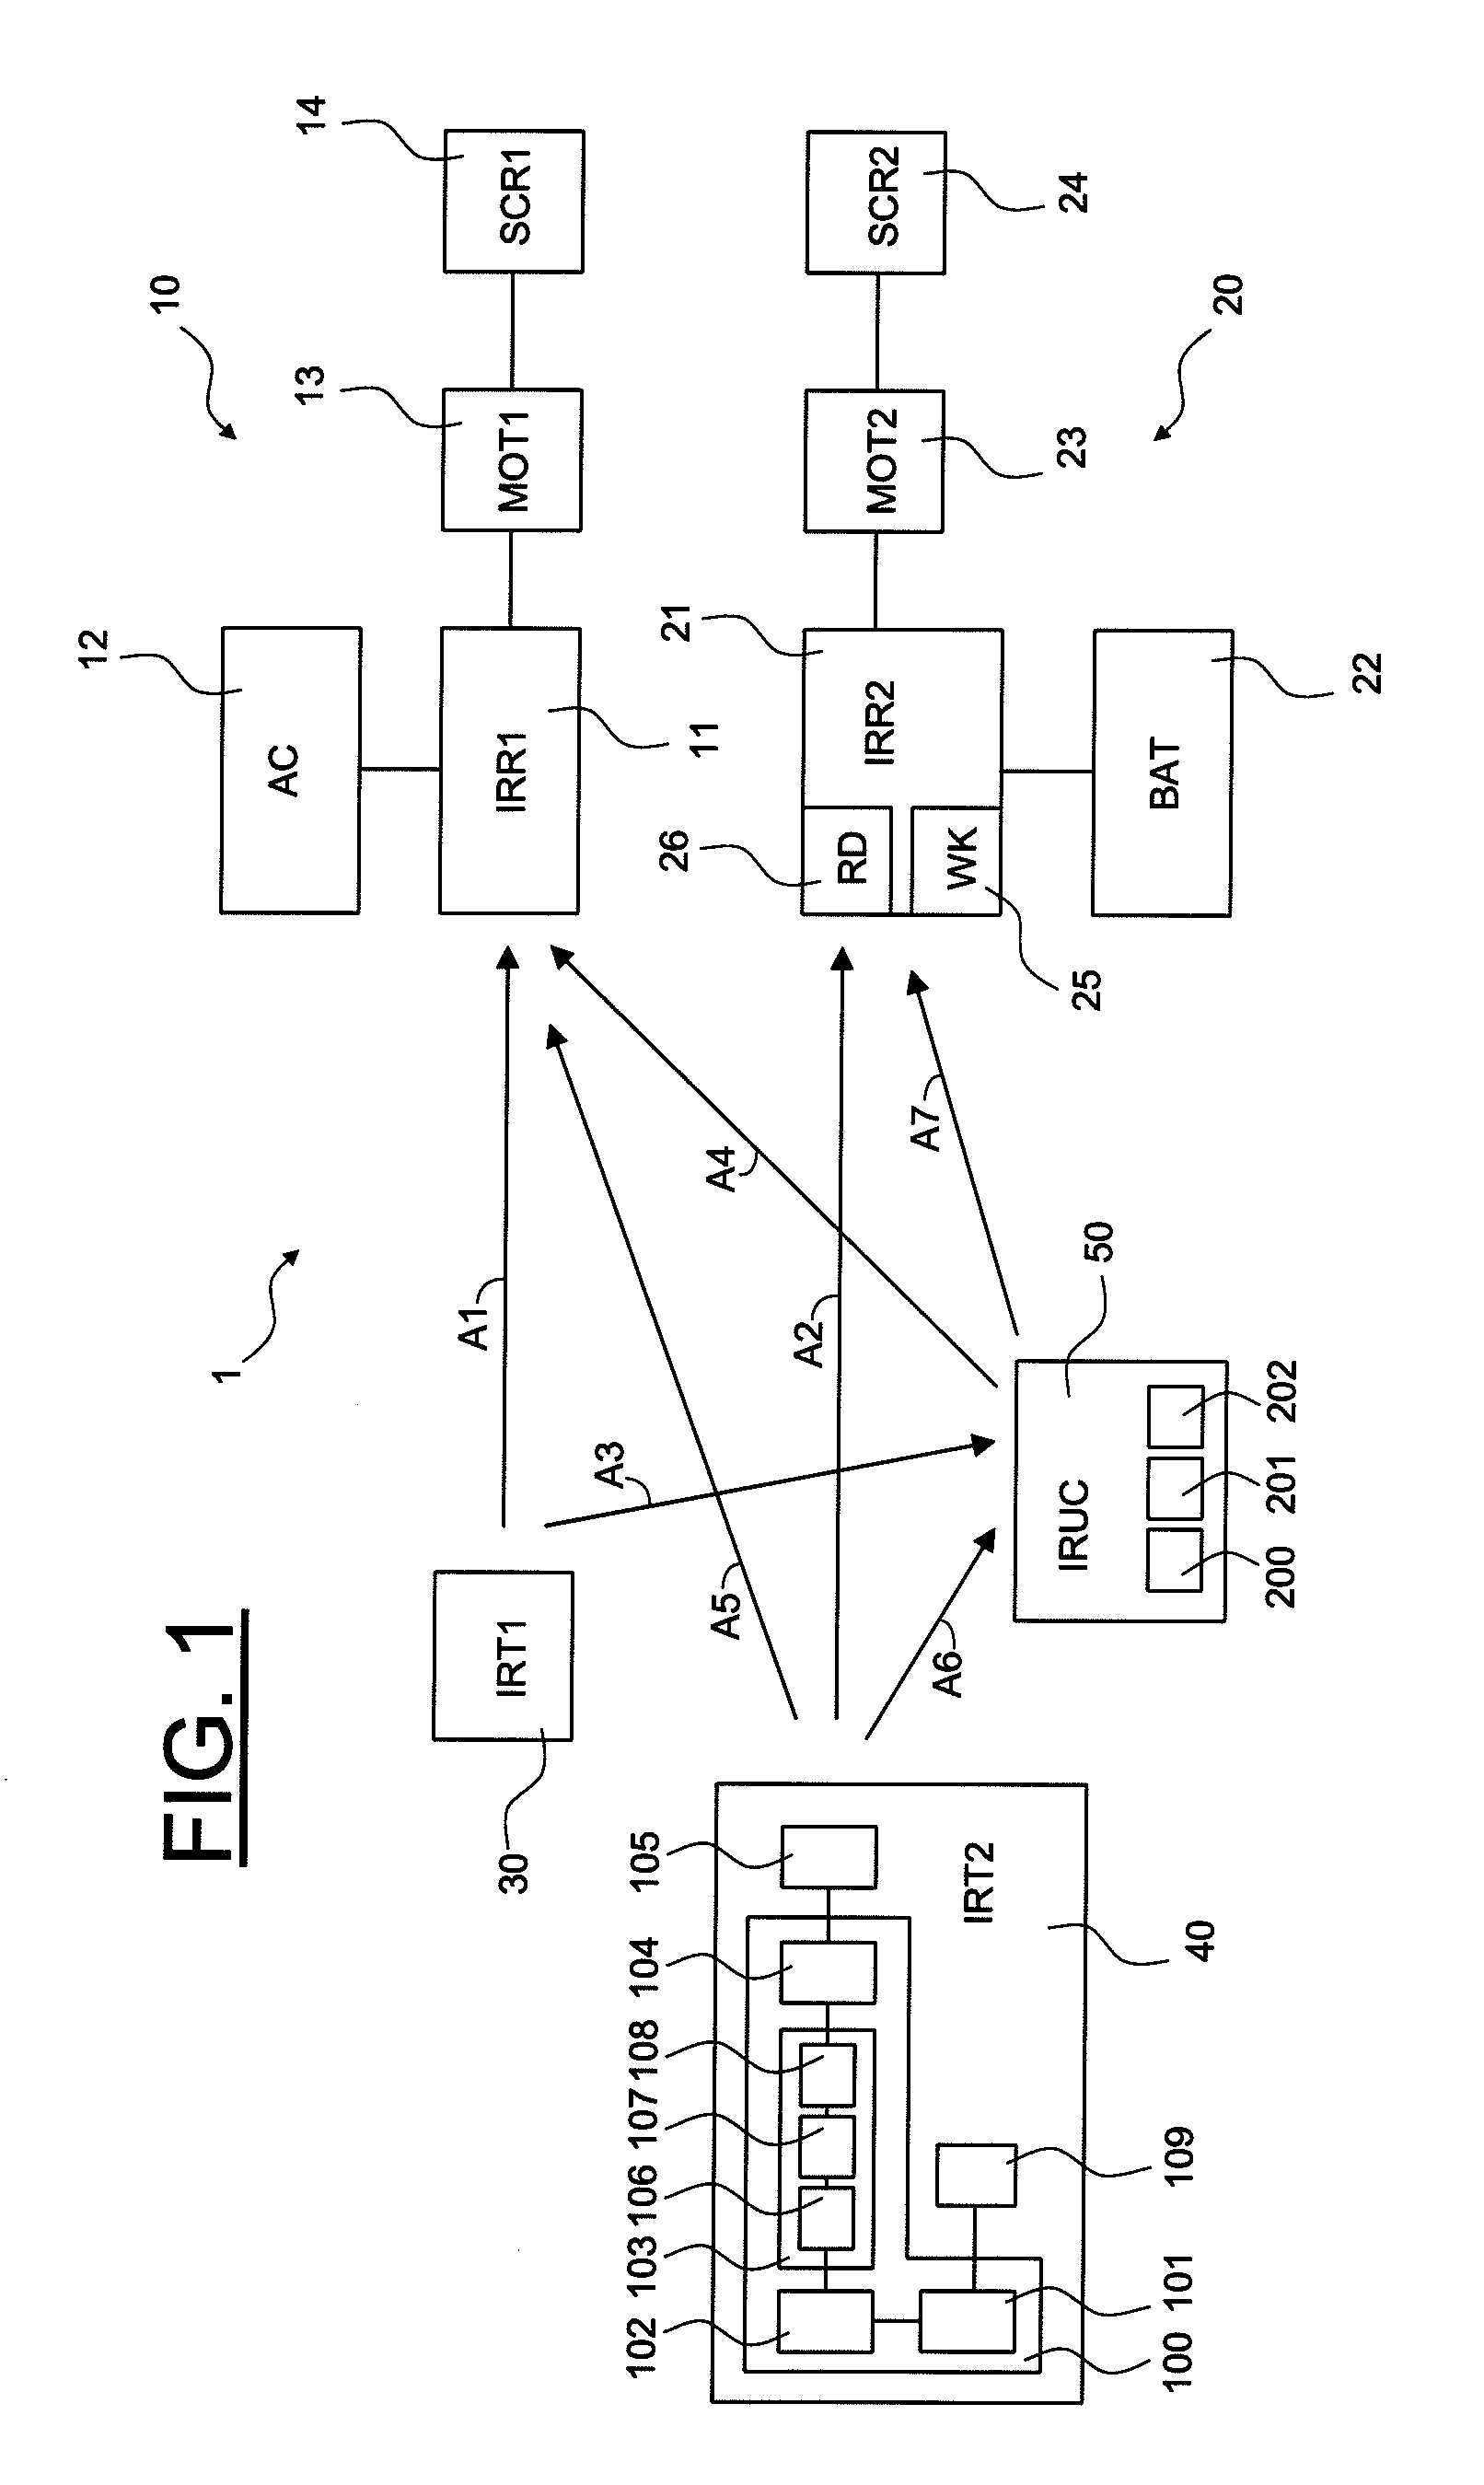 Method for communicating information by Infrared rays between a transmitter and a receiver in a home-automation network